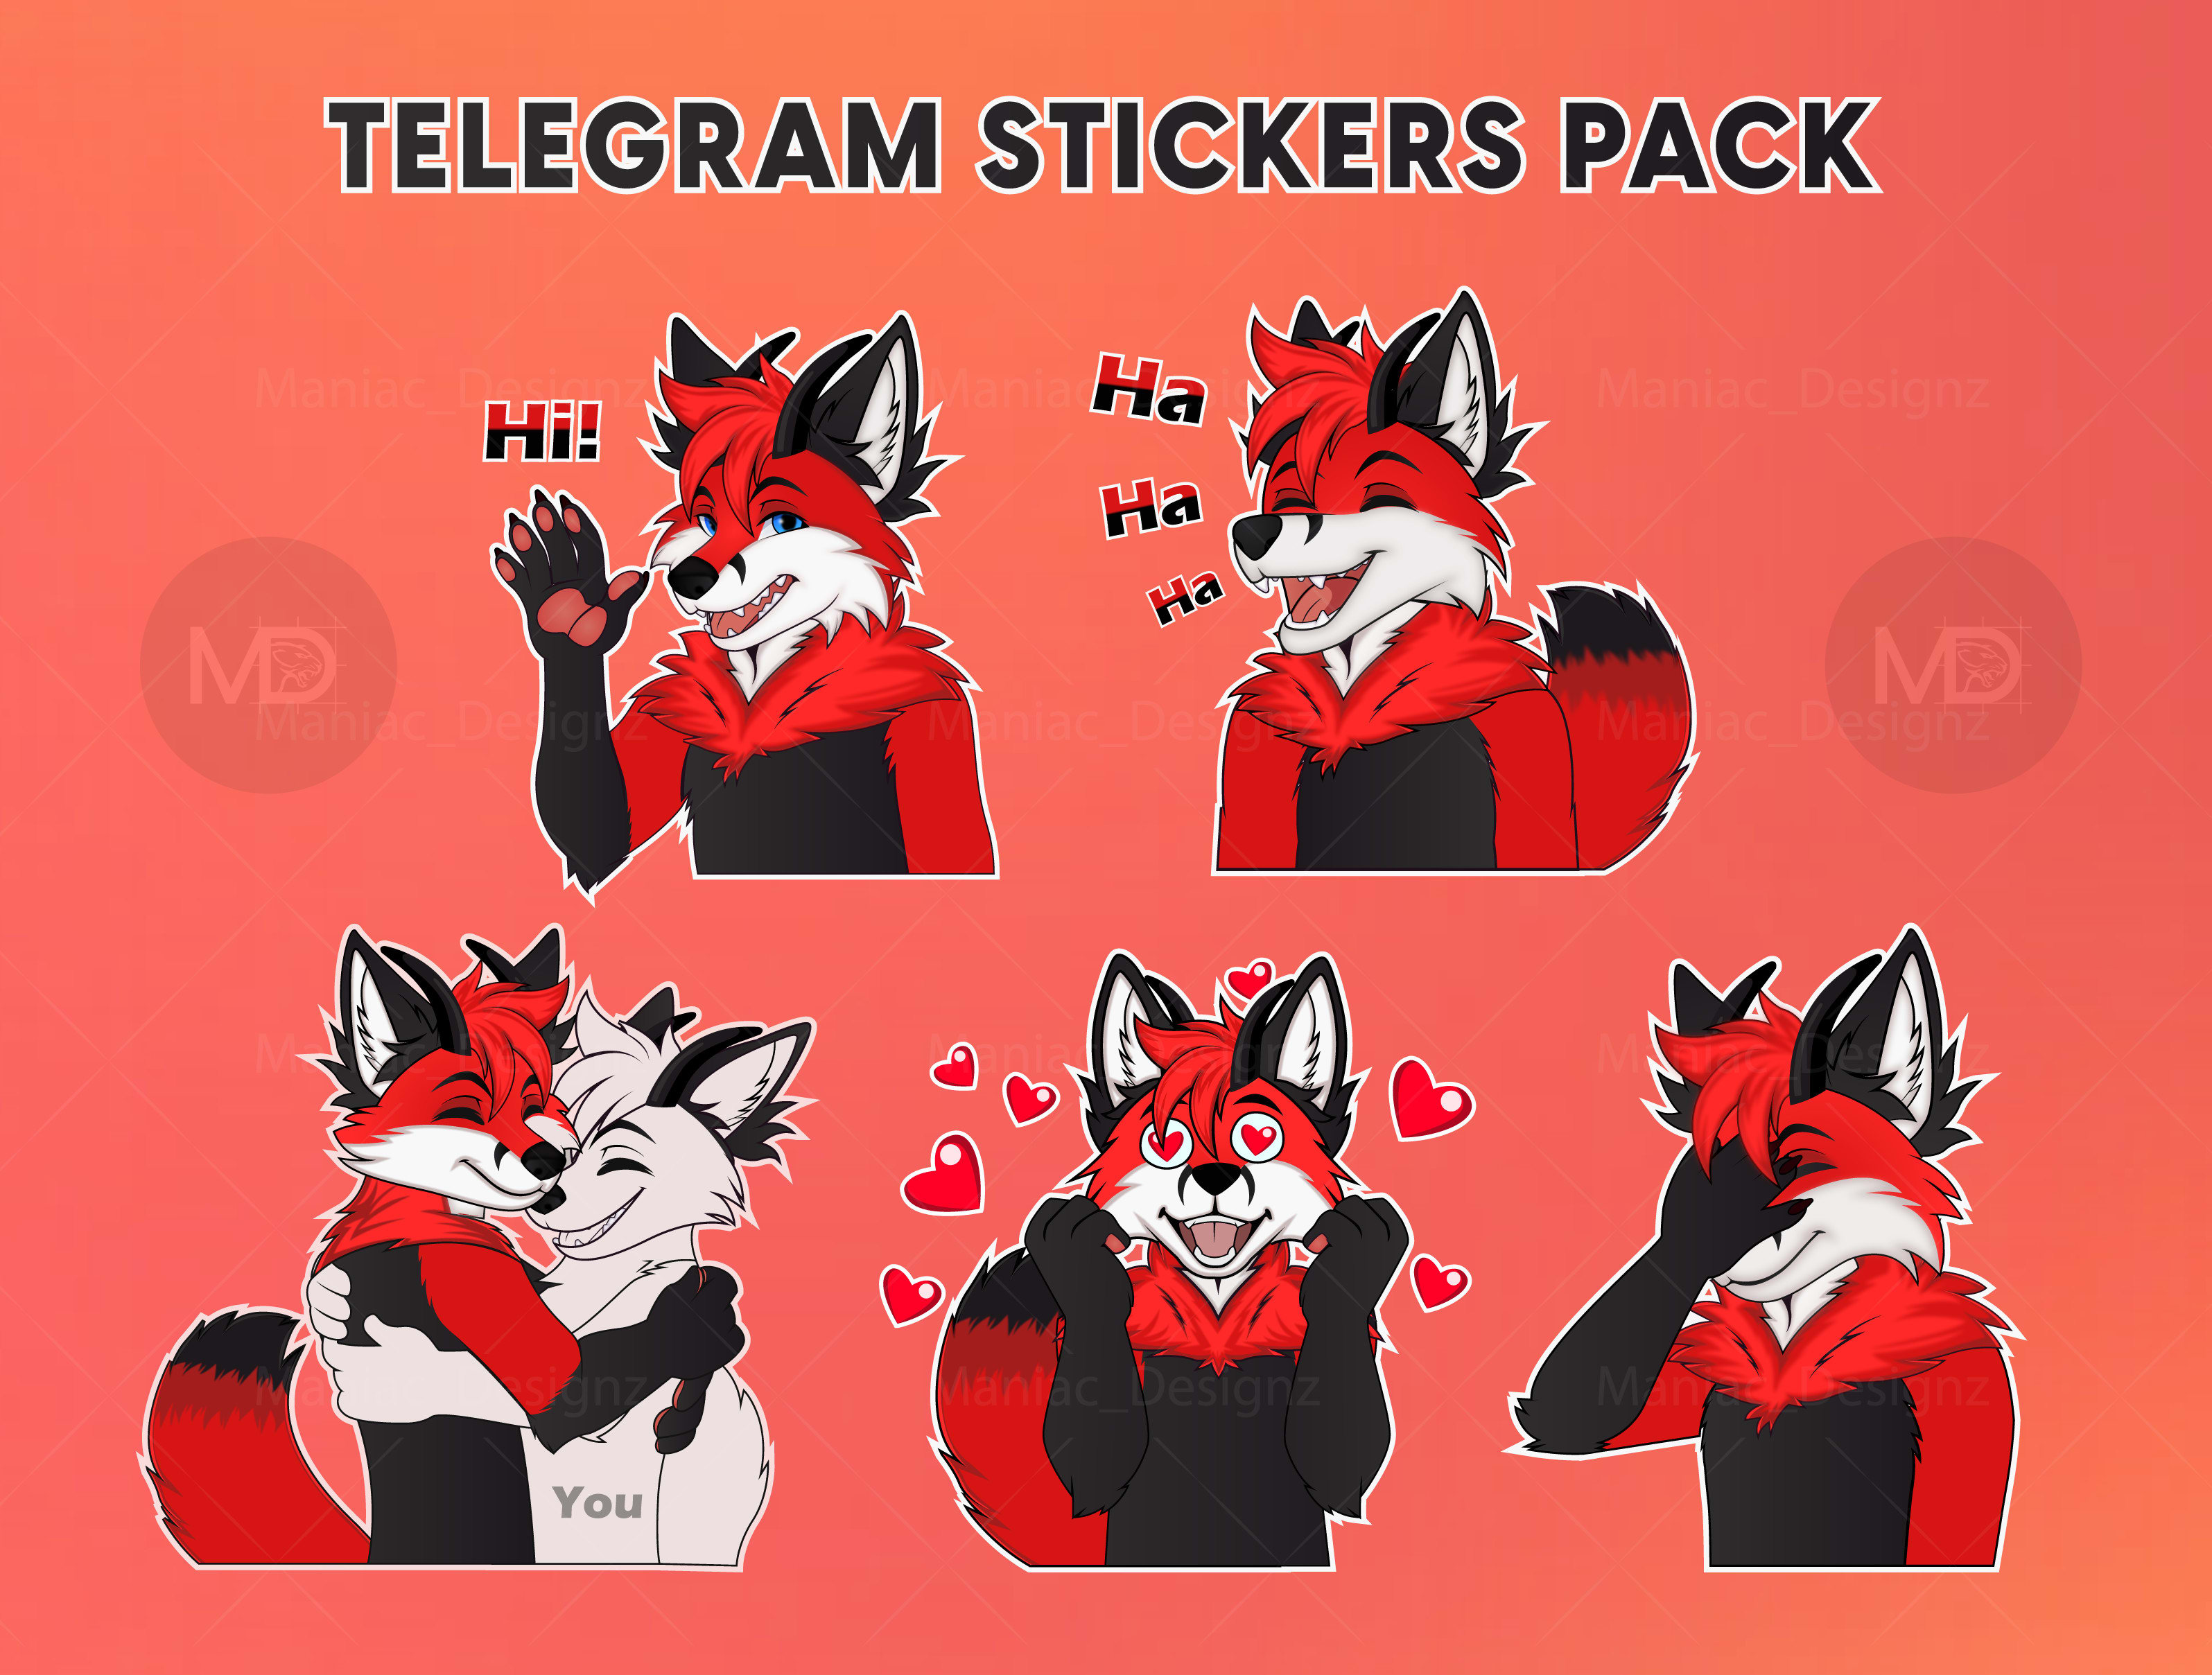 Draw your furry stickers for telegram or discord by Maniac_designz